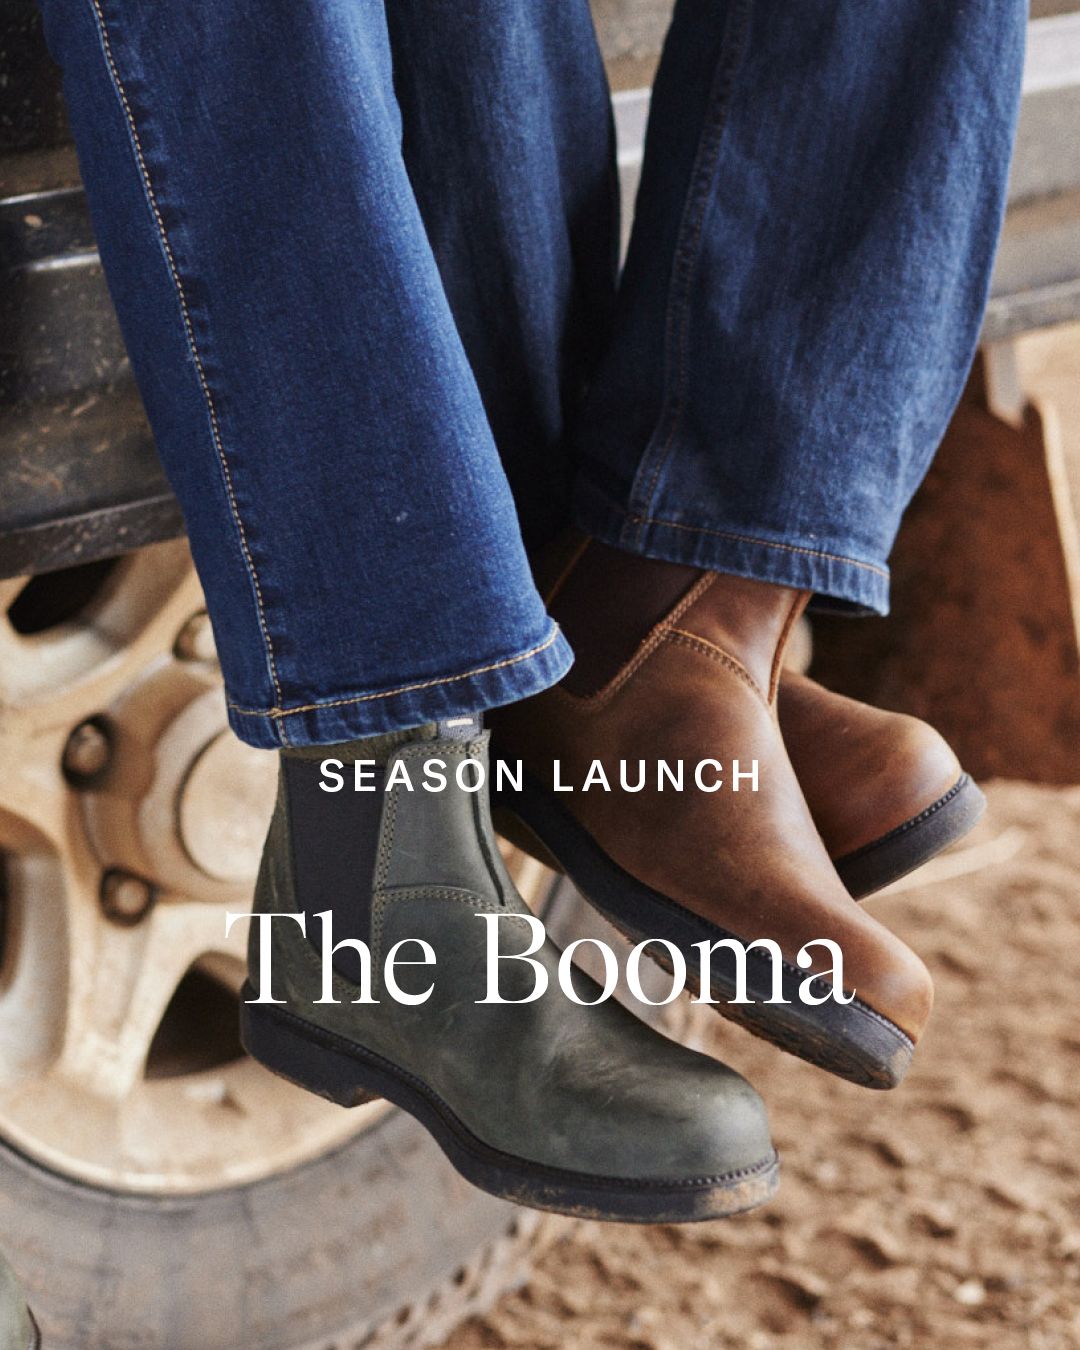 The Booma

The ultimate knockabout boot is back and...

Only $189. 

Shop the Booma here | https://rb.click/3RtEEg3

#RBSellars